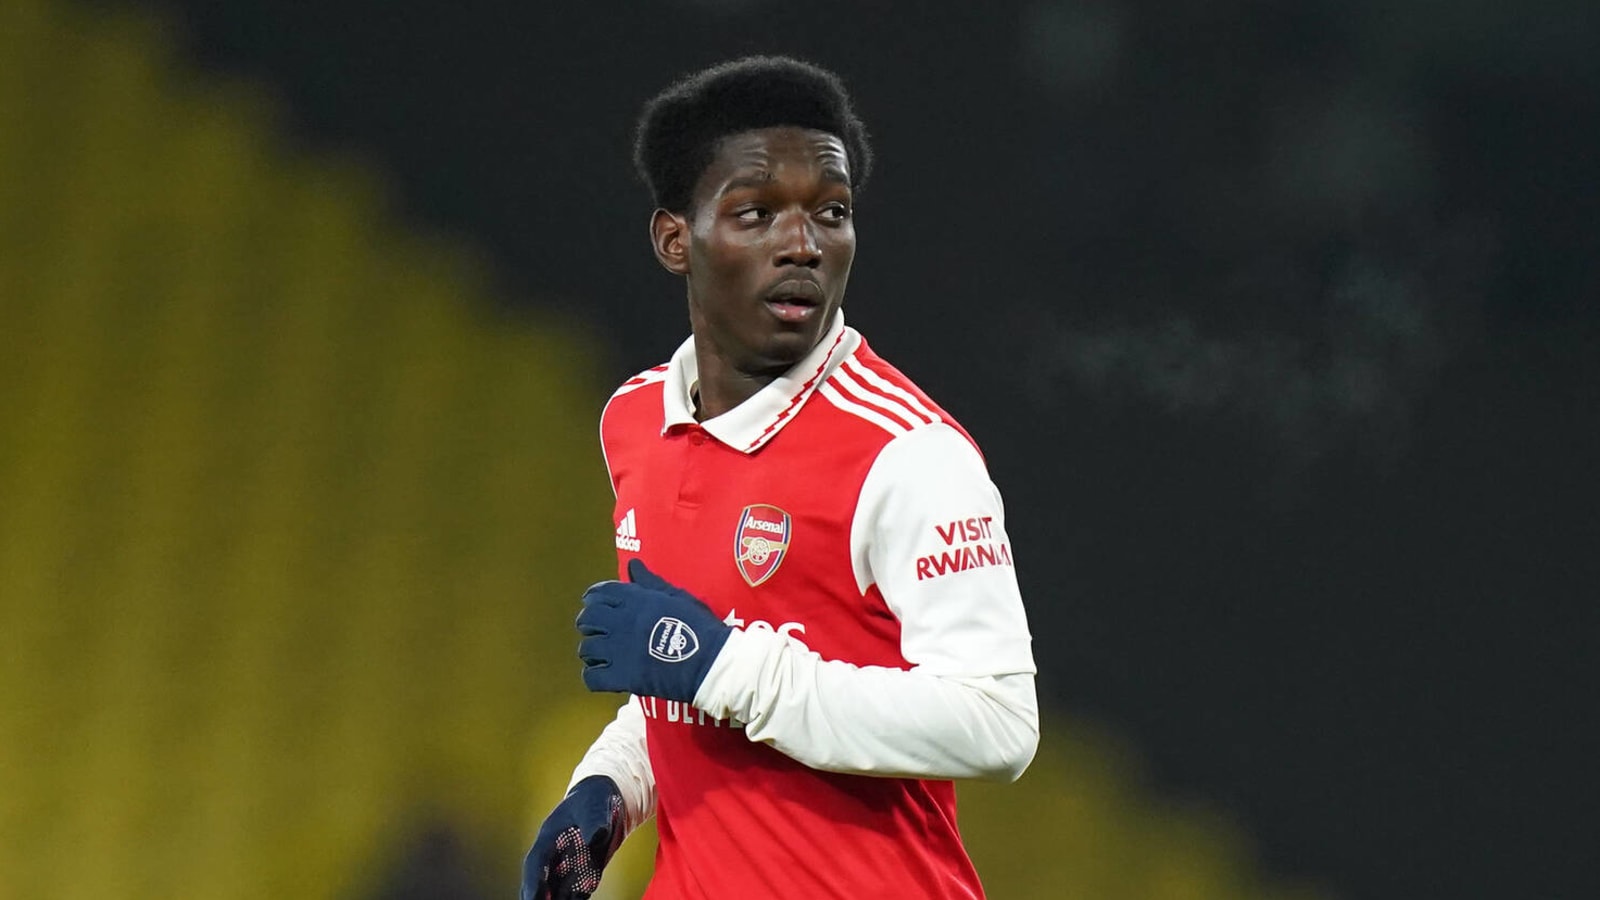 Clubs in Belgium and Netherlands are circling Arsenal youngster